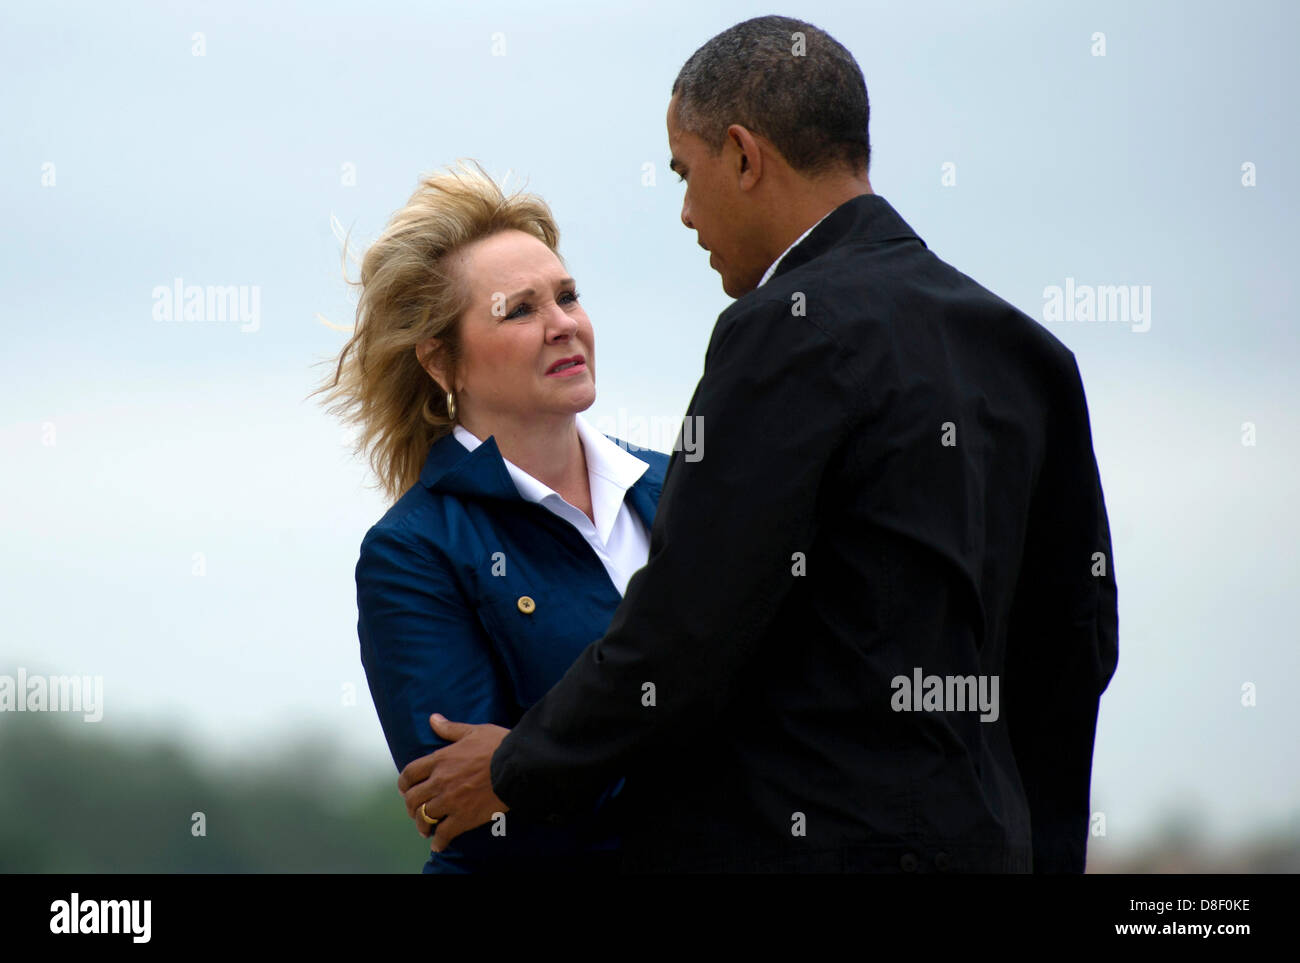 US President Barack Obama greets Oklahoma Governor Mary Fallin at Tinker Air Force Base on his way to tour areas damaged by an EF5 tornado May 26, 2013 in Oklahoma City, OK. Stock Photo